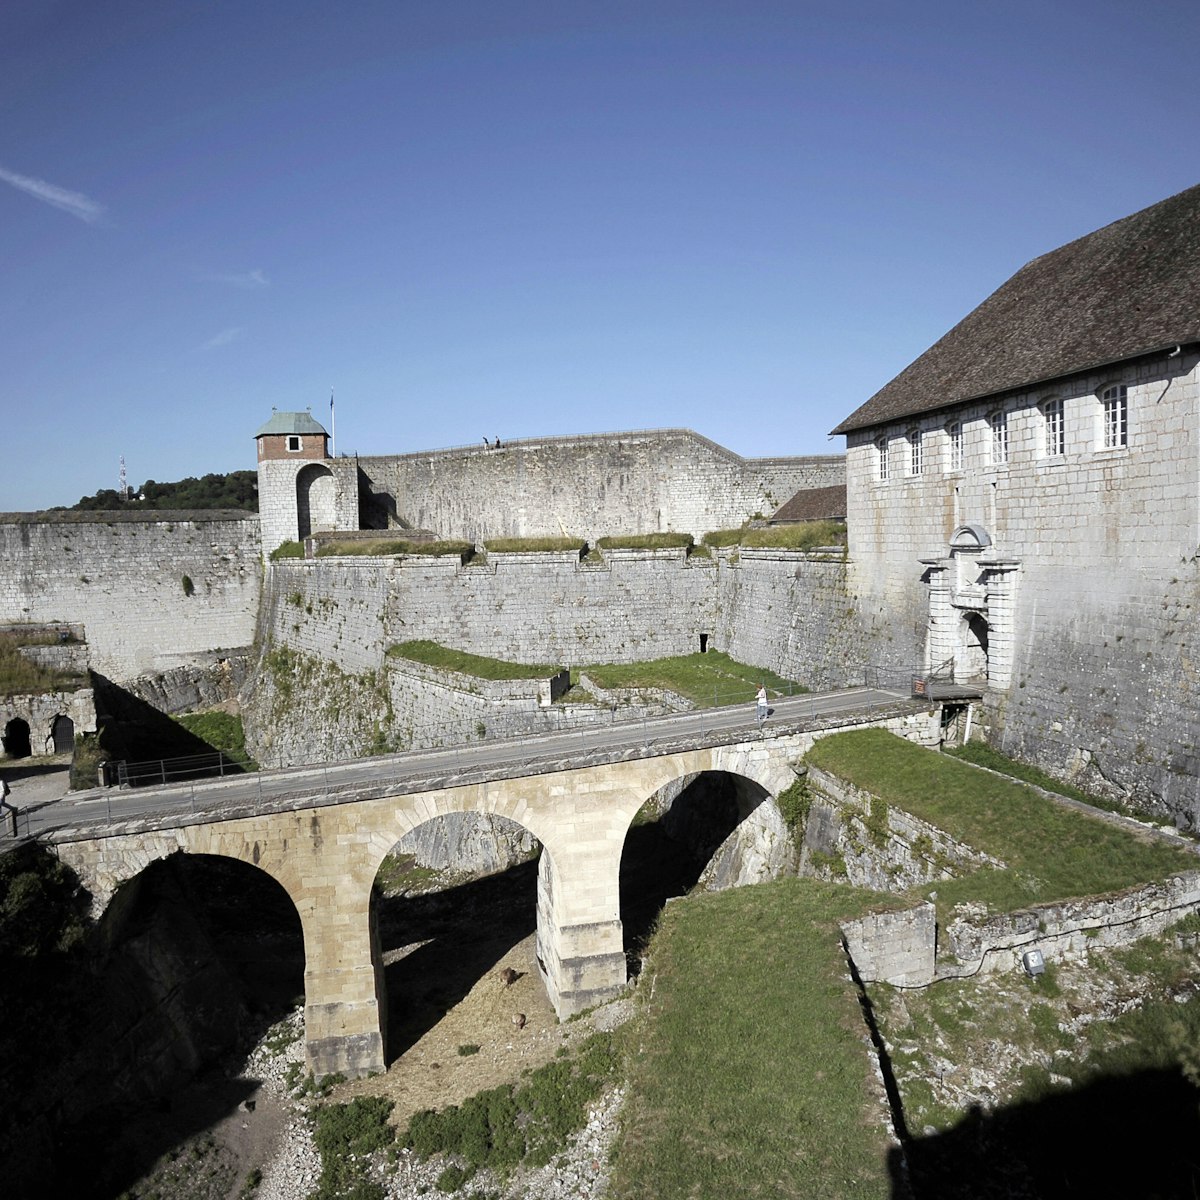 A picture taken on July 10, 2008, in Besancon, eastern France shows the fortification of the town's citadel, which was added to the list of World Heritage sites by UNESCO on July 7 2008. The fortification represents the "finest examples" of the work of Sebastien Le Prestre de Vauban, a military engineer of King Louis XIV. The total number of World Heritage sites now reaches 878 sites in 145 countries.   AFP PHOTO JEFF PACHOUD (Photo credit should read JEFF PACHOUD/AFP/Getty Images)